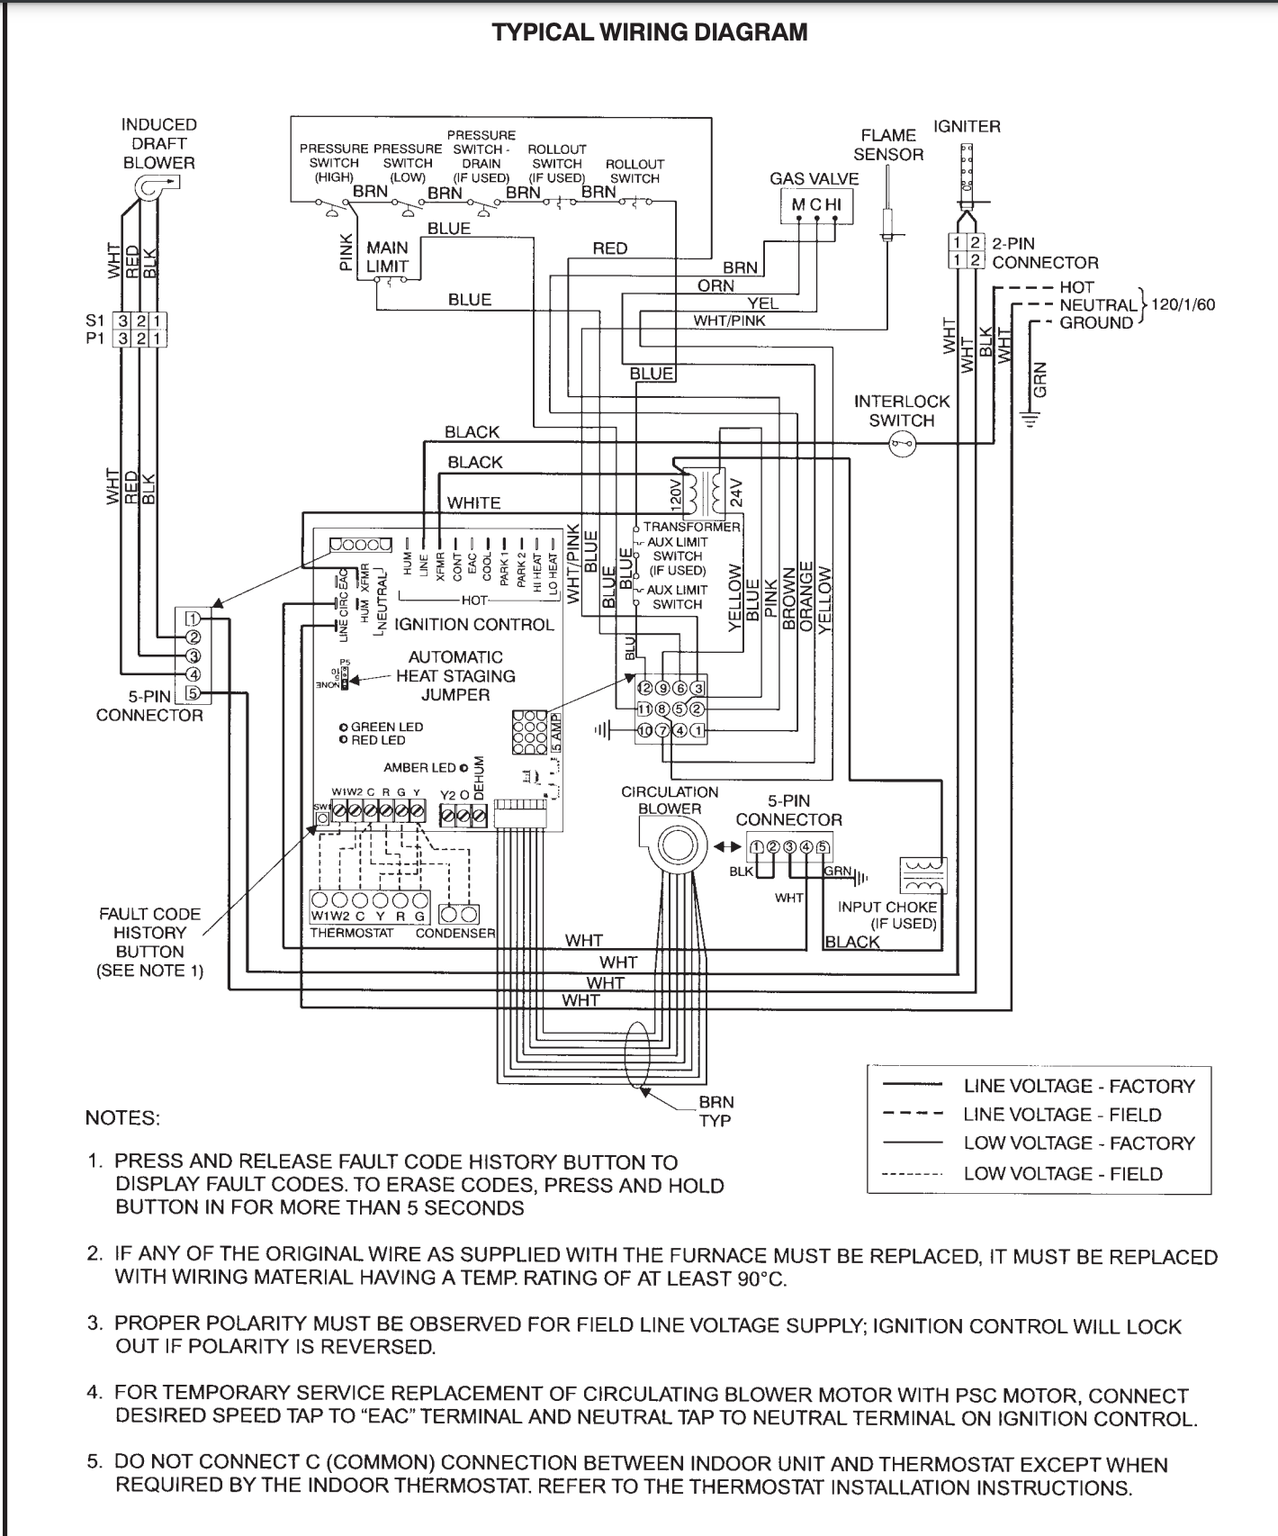 Ducane Heating & A/C Equipment History, Manuals, Contact Information Carrier Thermostat Wiring Diagram InspectAPedia.com